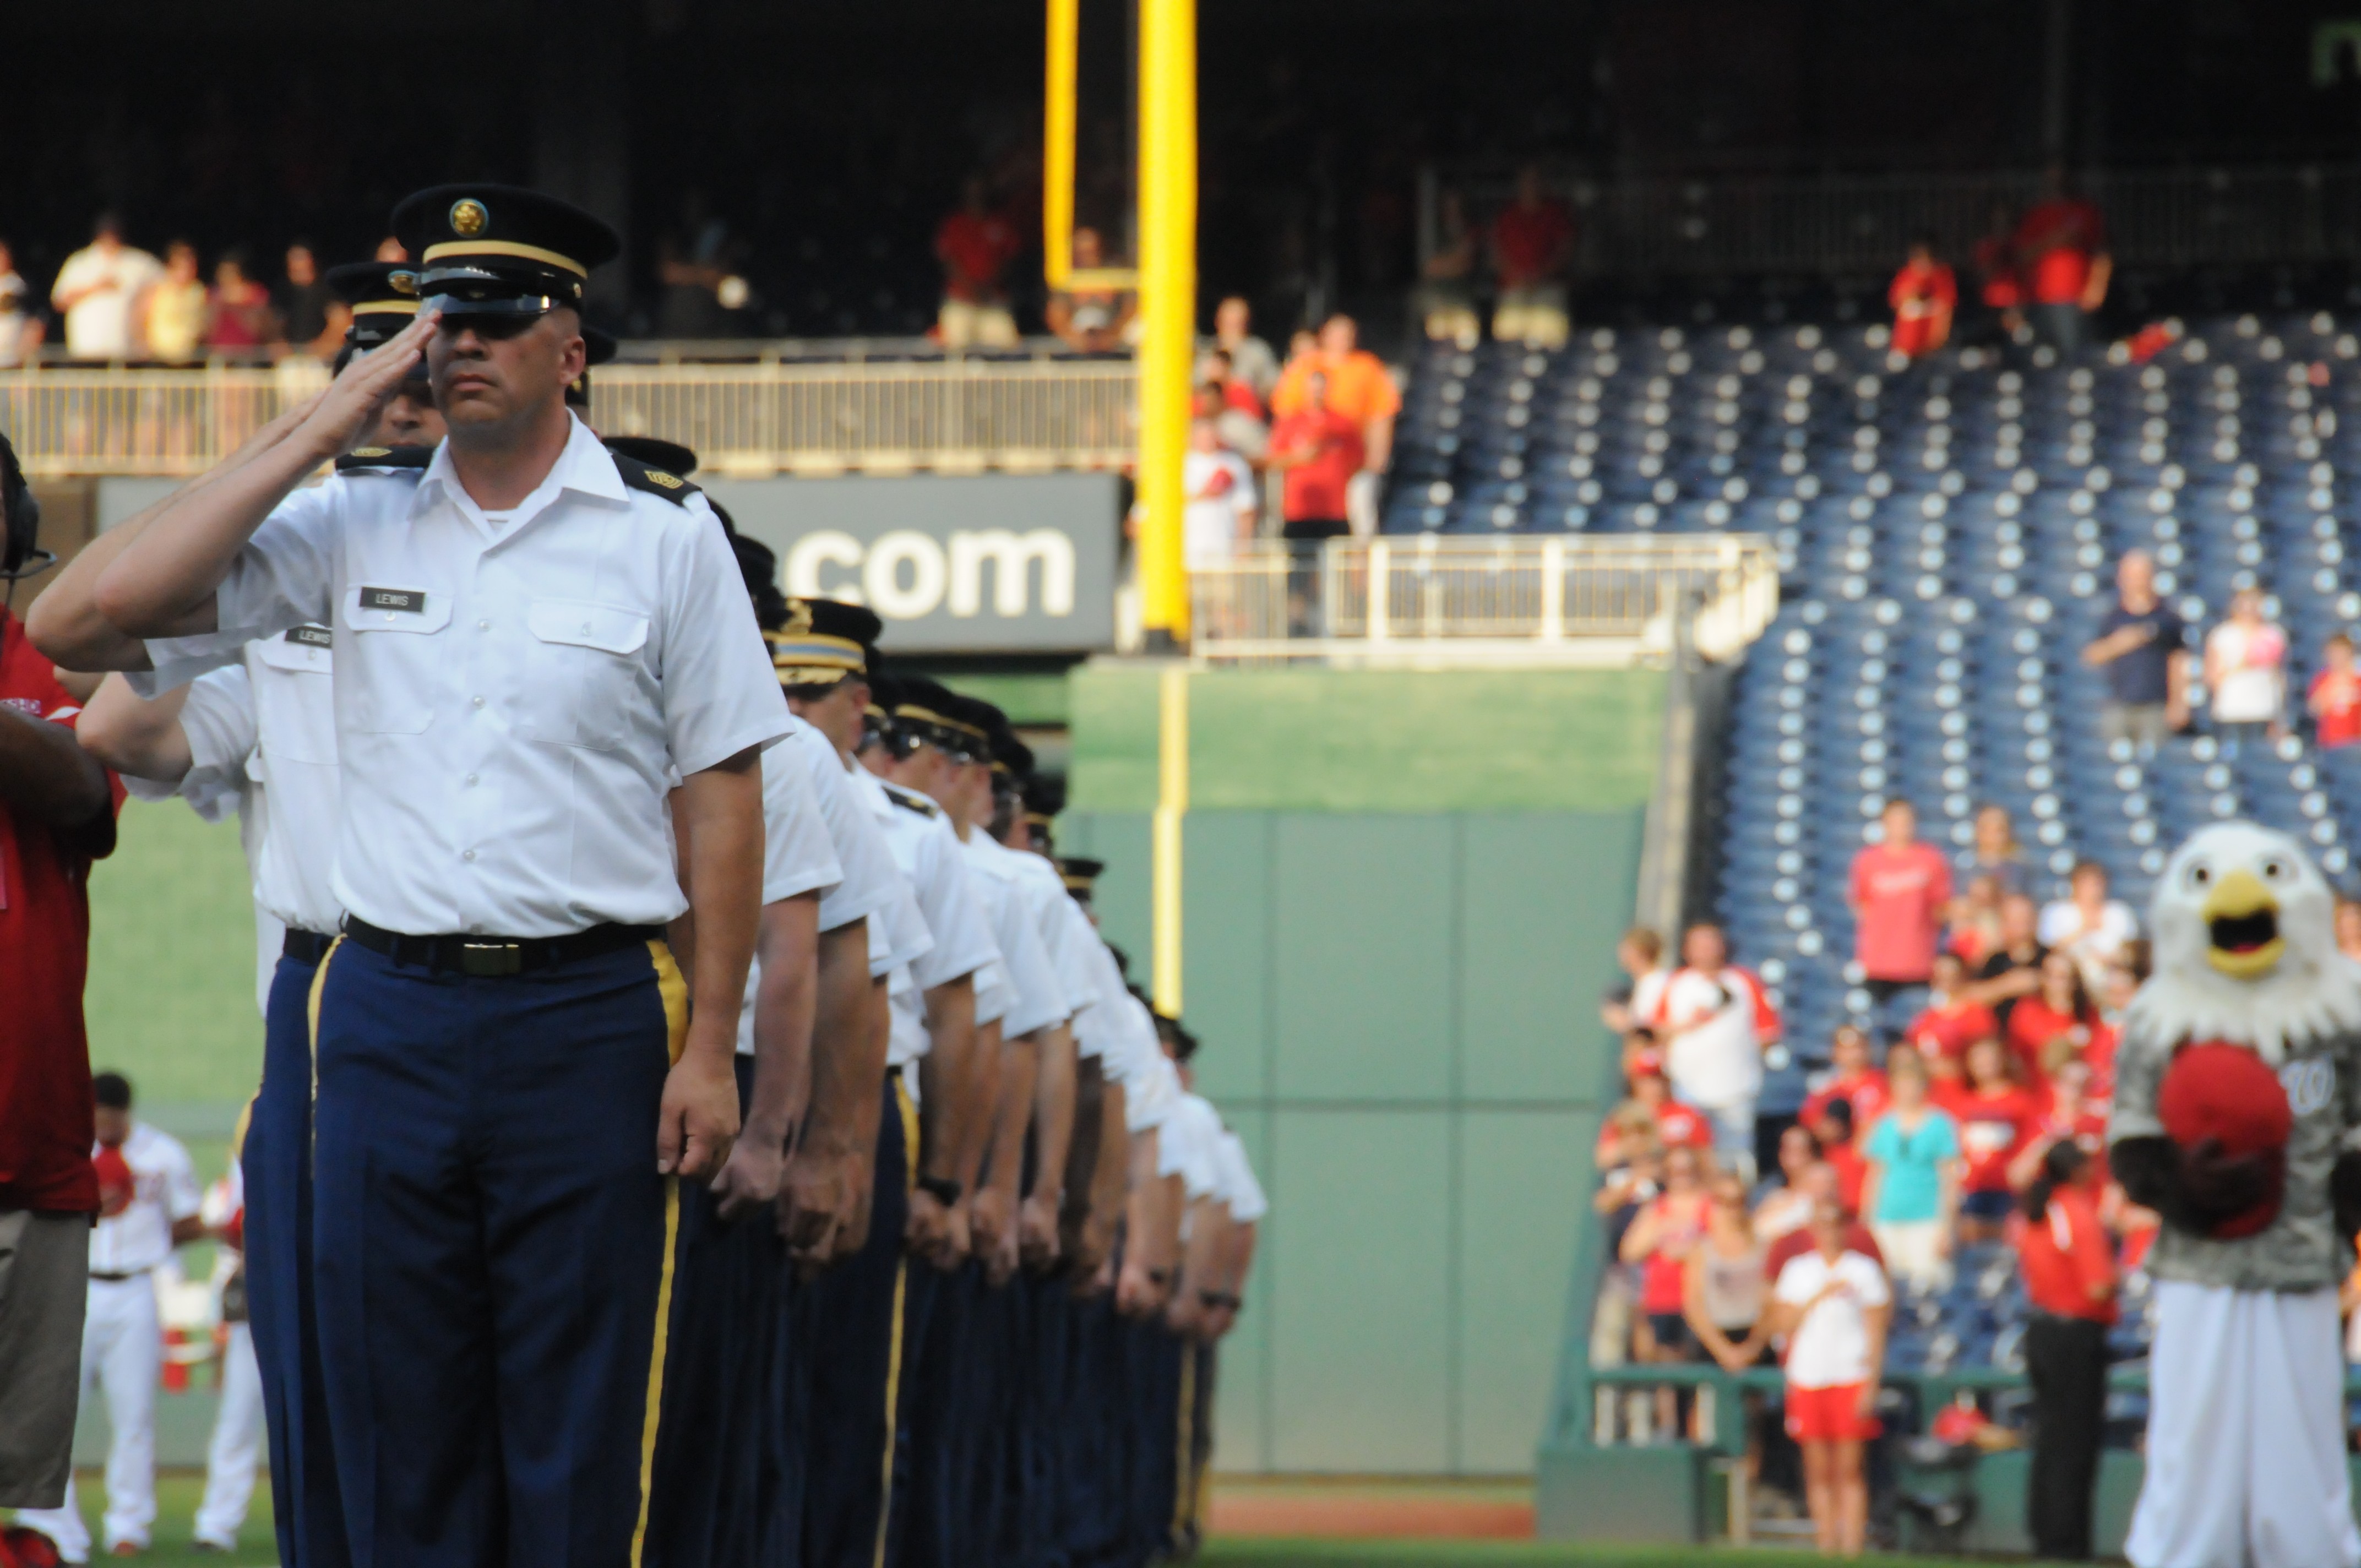 Washington Nationals recognize, honor Soldiers, Article